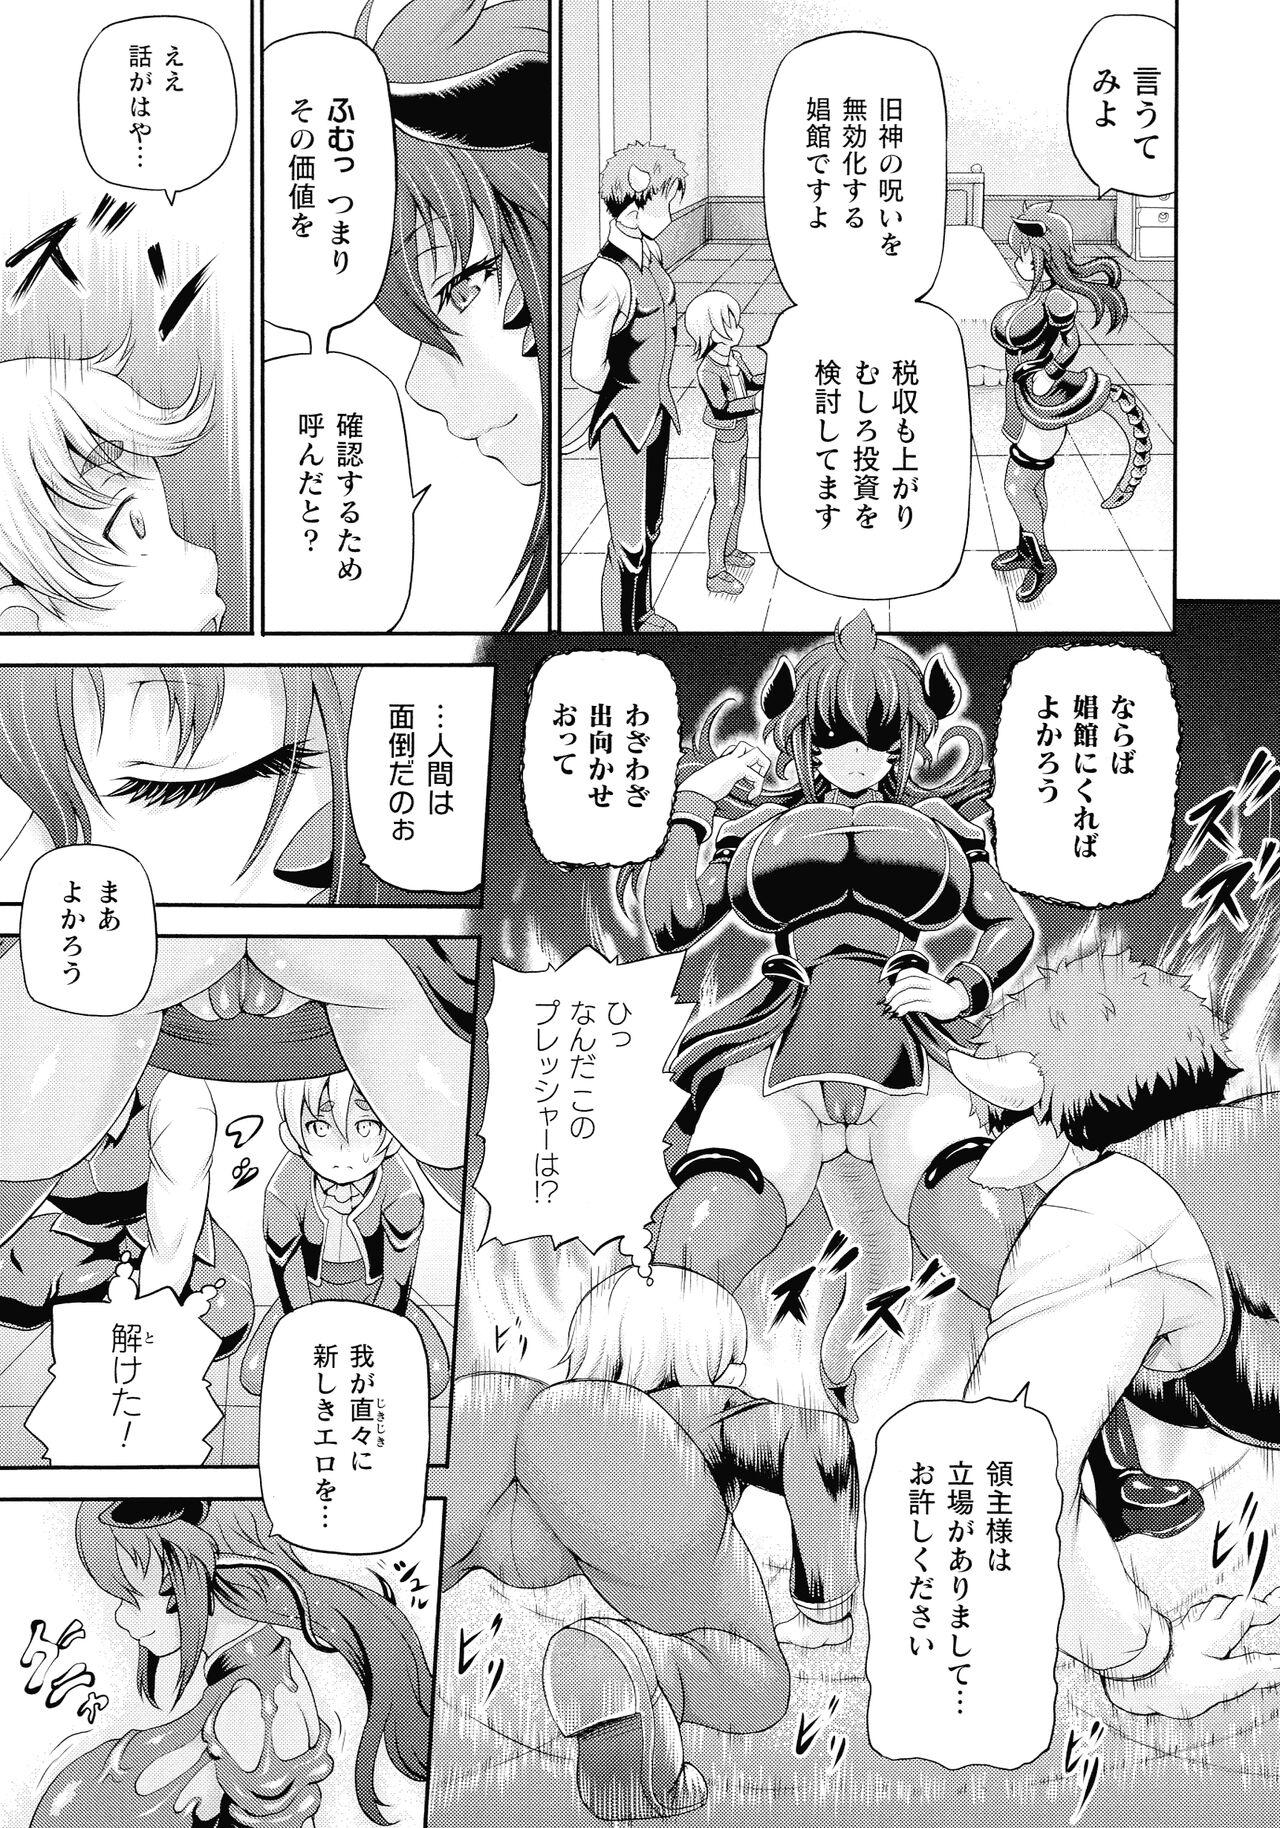 Isekai Shoukan 3 - Brothel in Another World 100